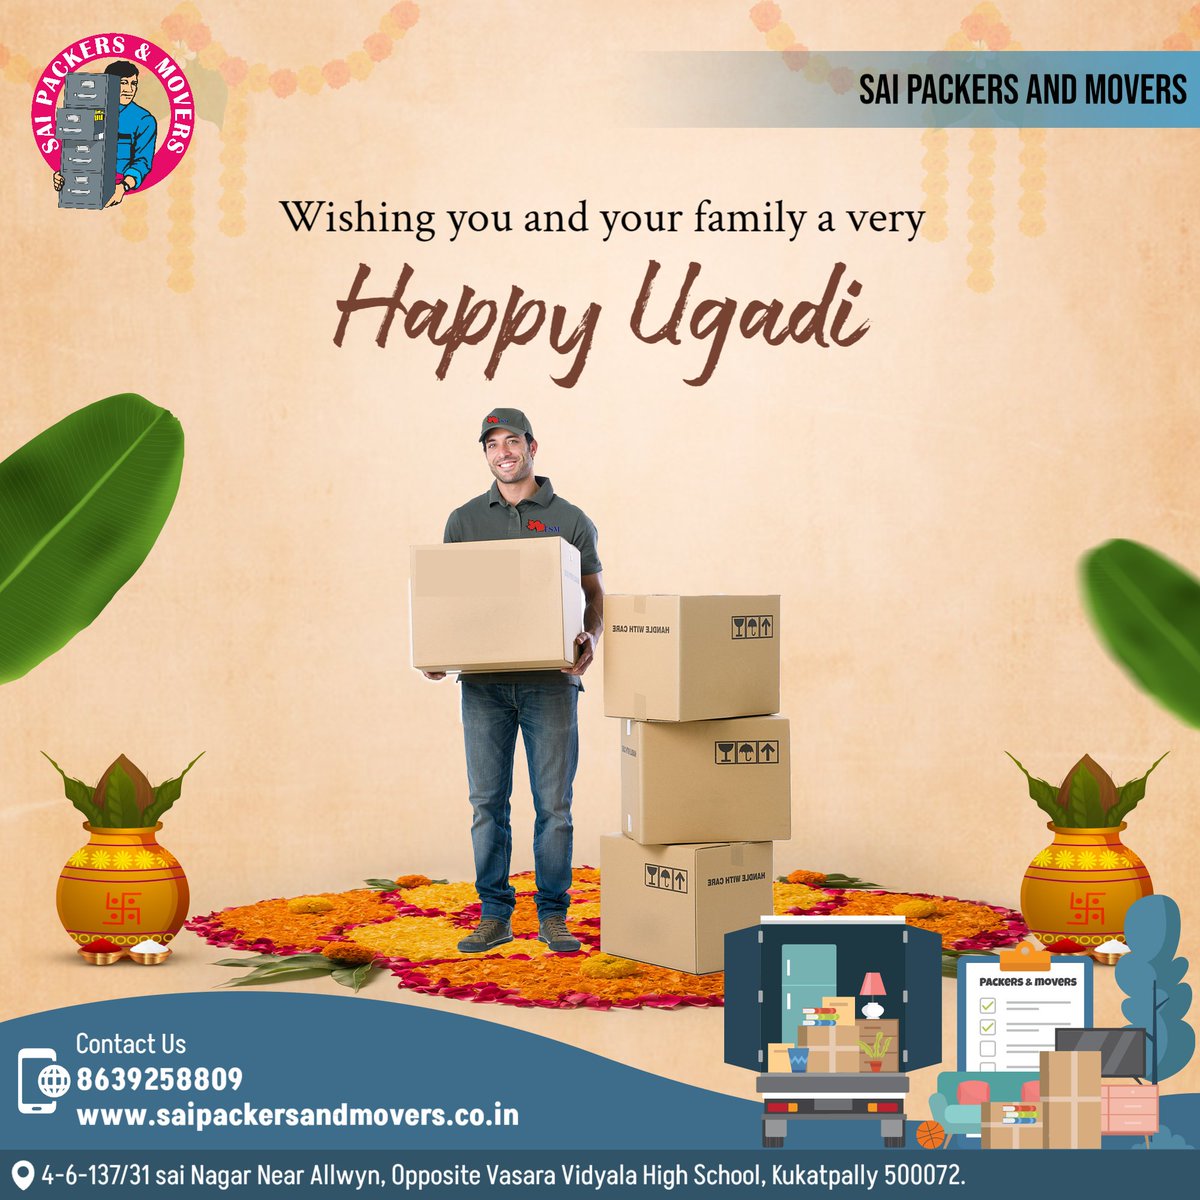 Relocating in Hyderabad? Choose Sai Packers and Movers in Hyderabad ✨🚛

Contact us today for a quote and let us take the stress out of relocation journey. 📦🛩️
#SaiPackersandMovers  #MoversHyderabad #StressFreeMove #RelocationExperts #MovingMadeEasy